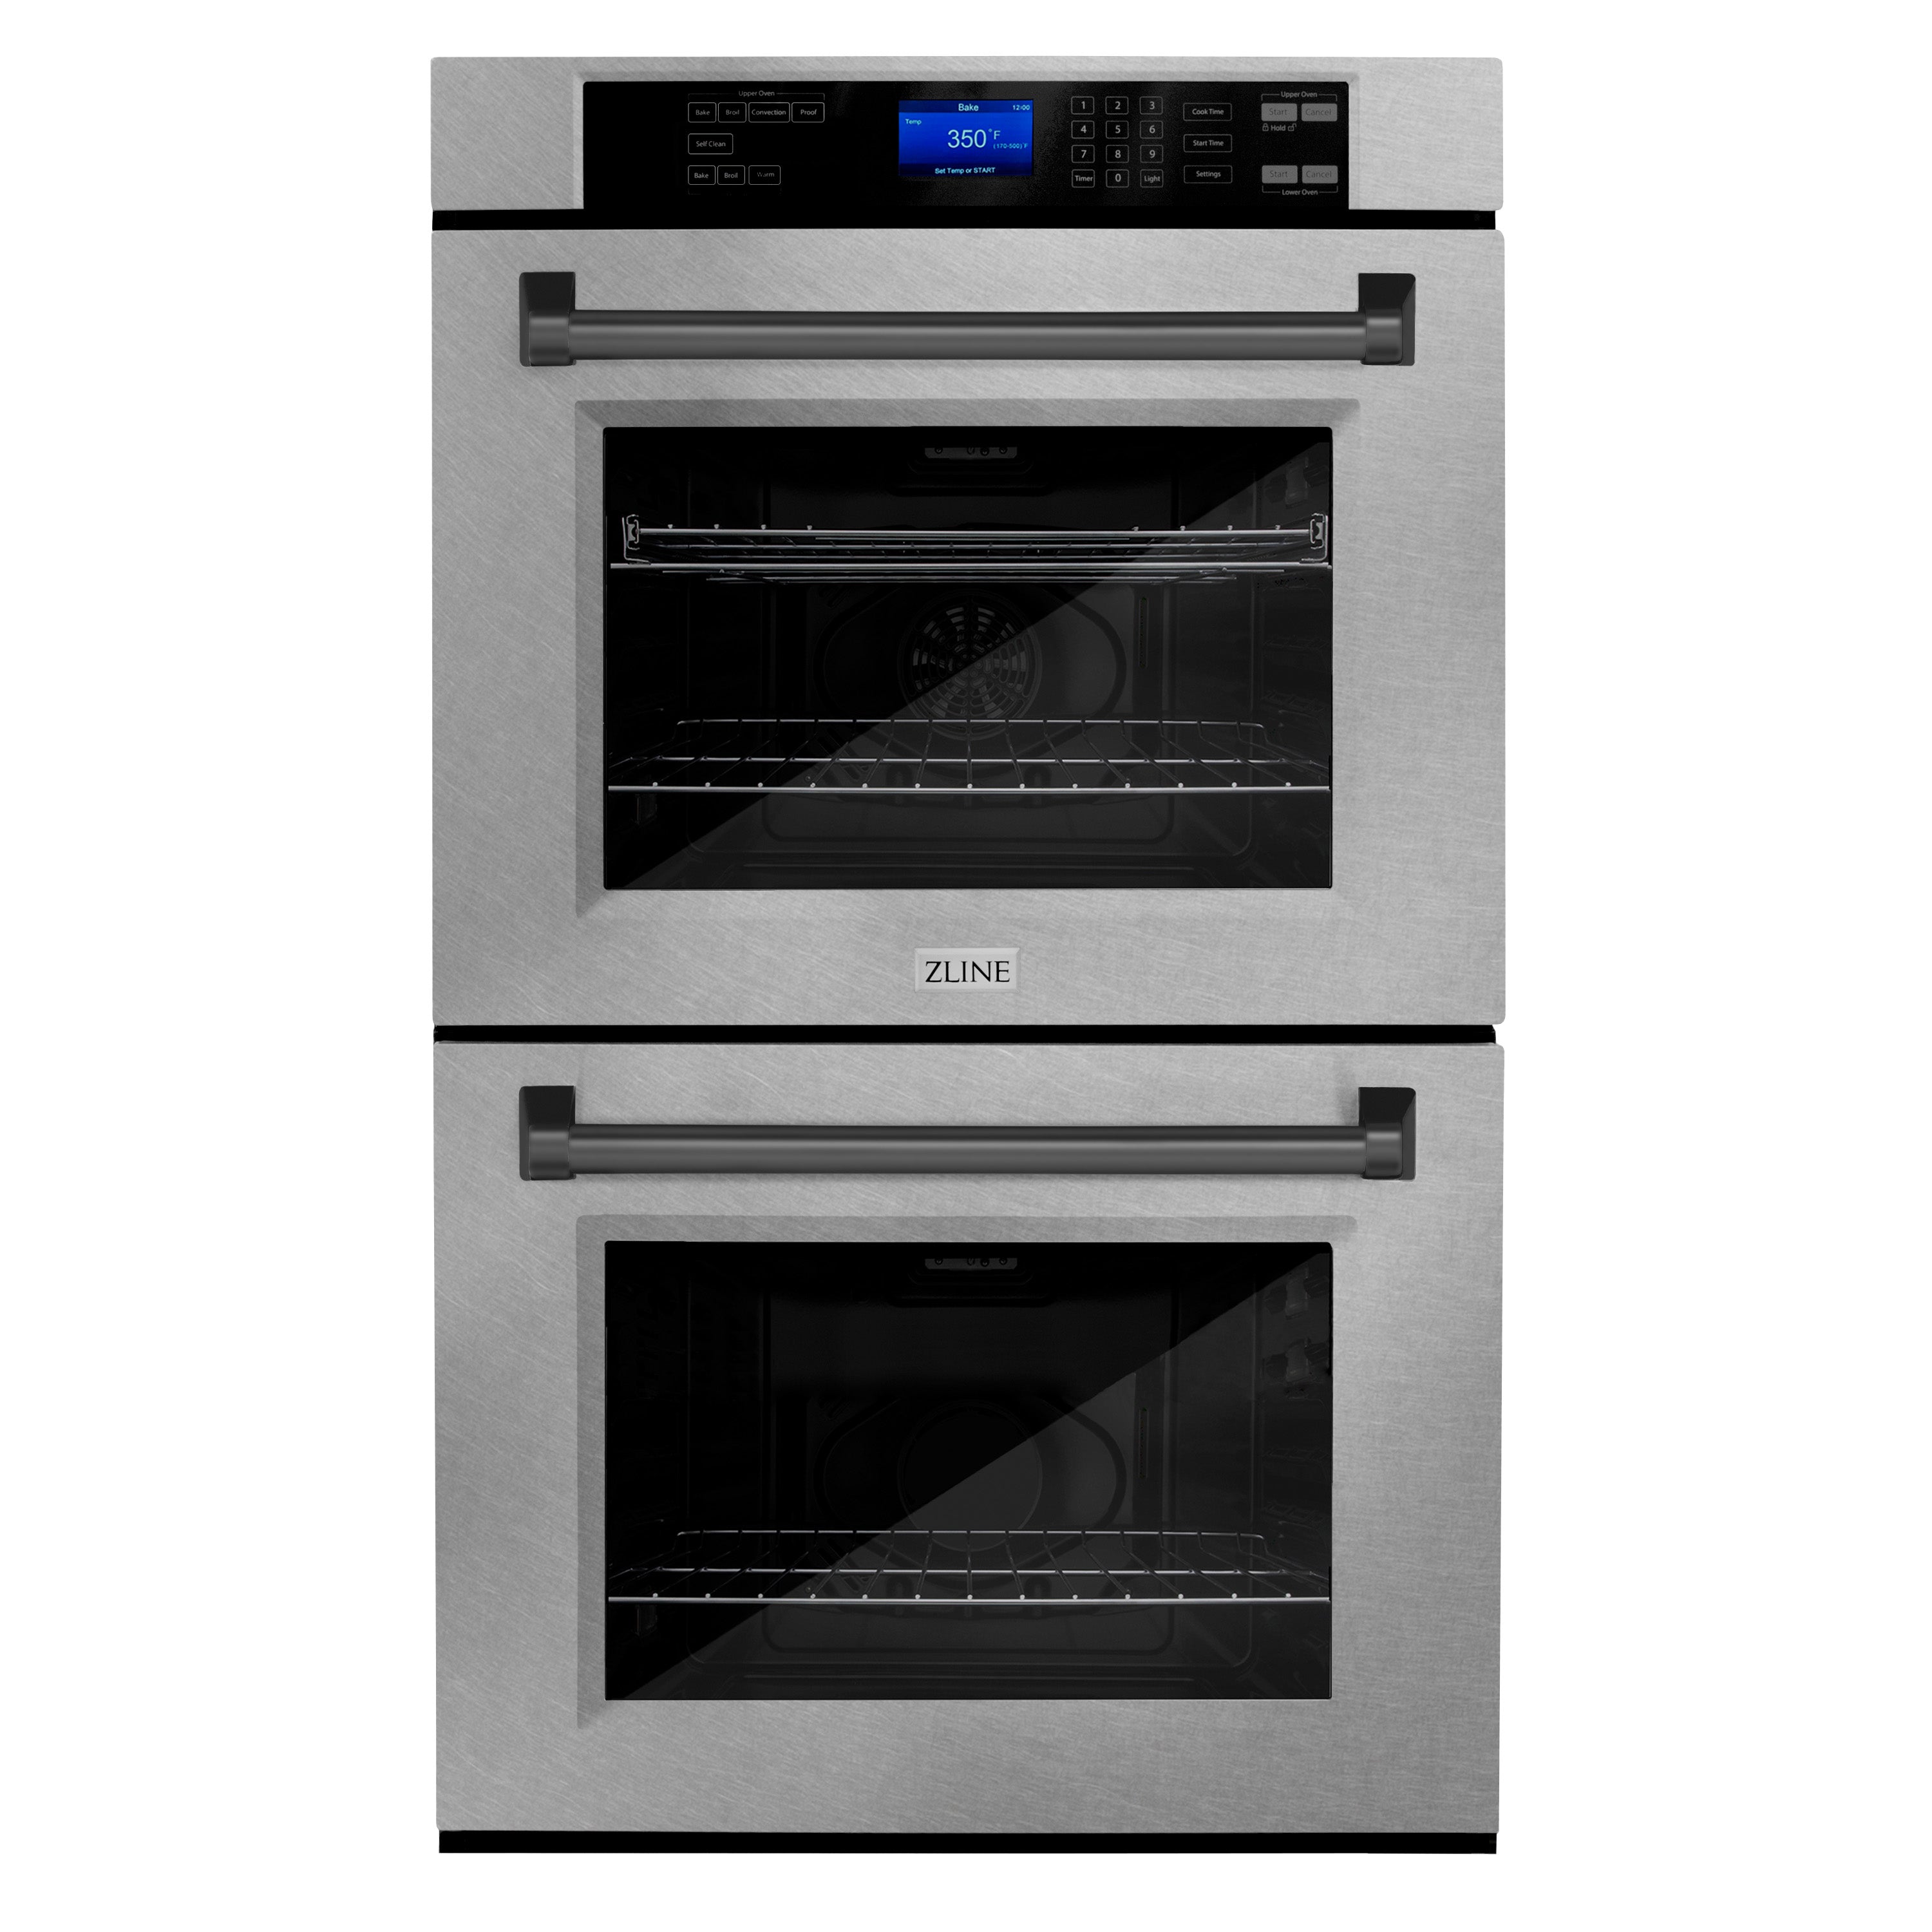 ZLINE 30" Autograph Edition Double Wall Oven with Self Clean and True Convection in Fingerprint Resistant Stainless Steel and Matte Black (AWDSZ-30-MB)